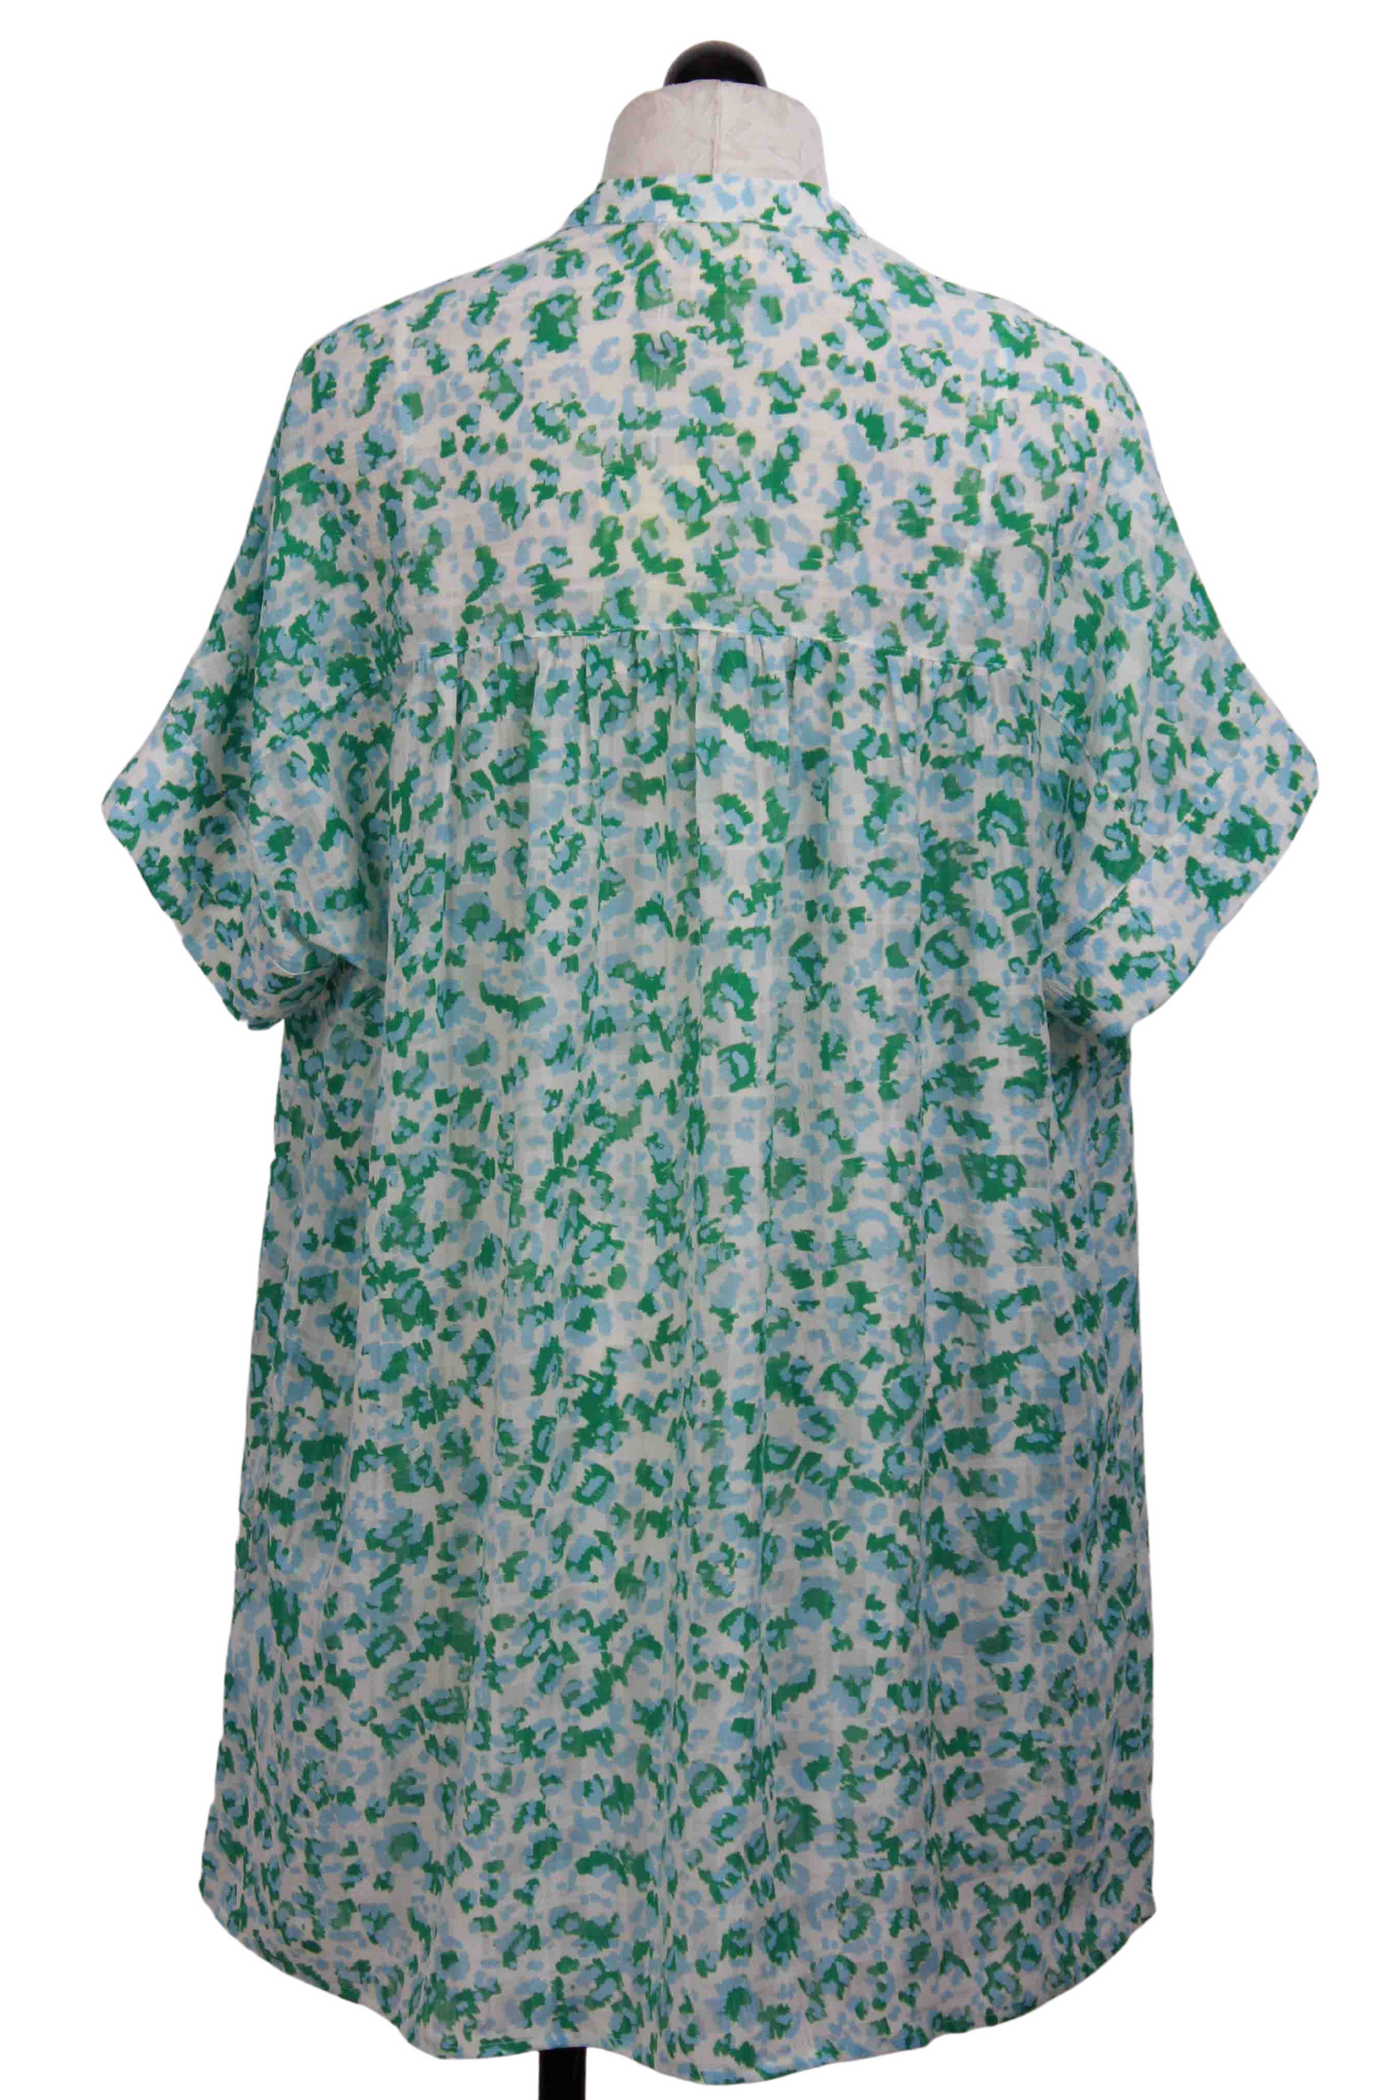 back view of Blue/Green Short Sleeve Printed Shirt Dress by The Korner